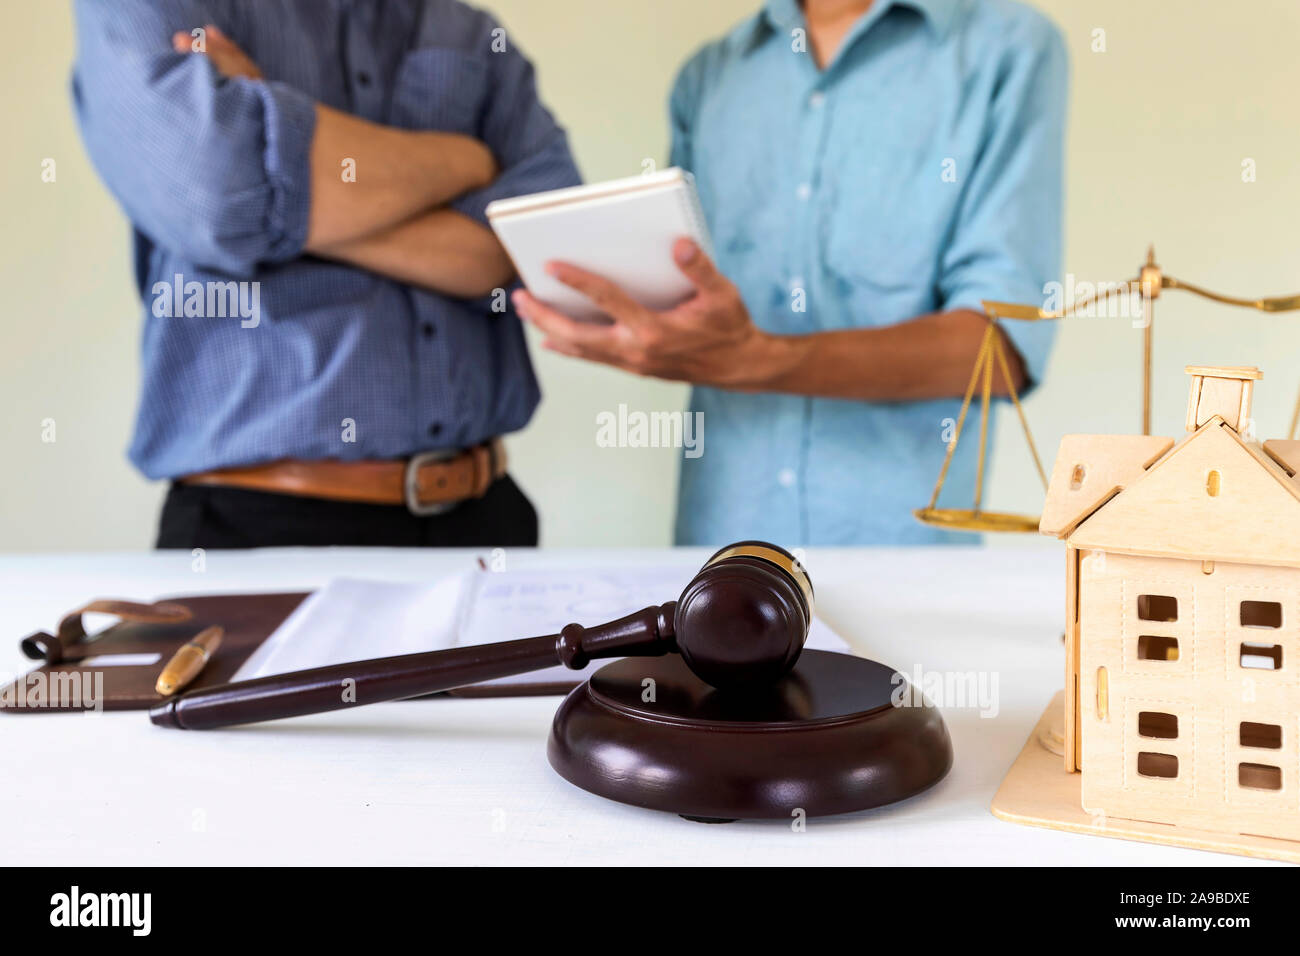 Judge gavel with lawyer bakground. Concepts of housing and real estate law. Stock Photo